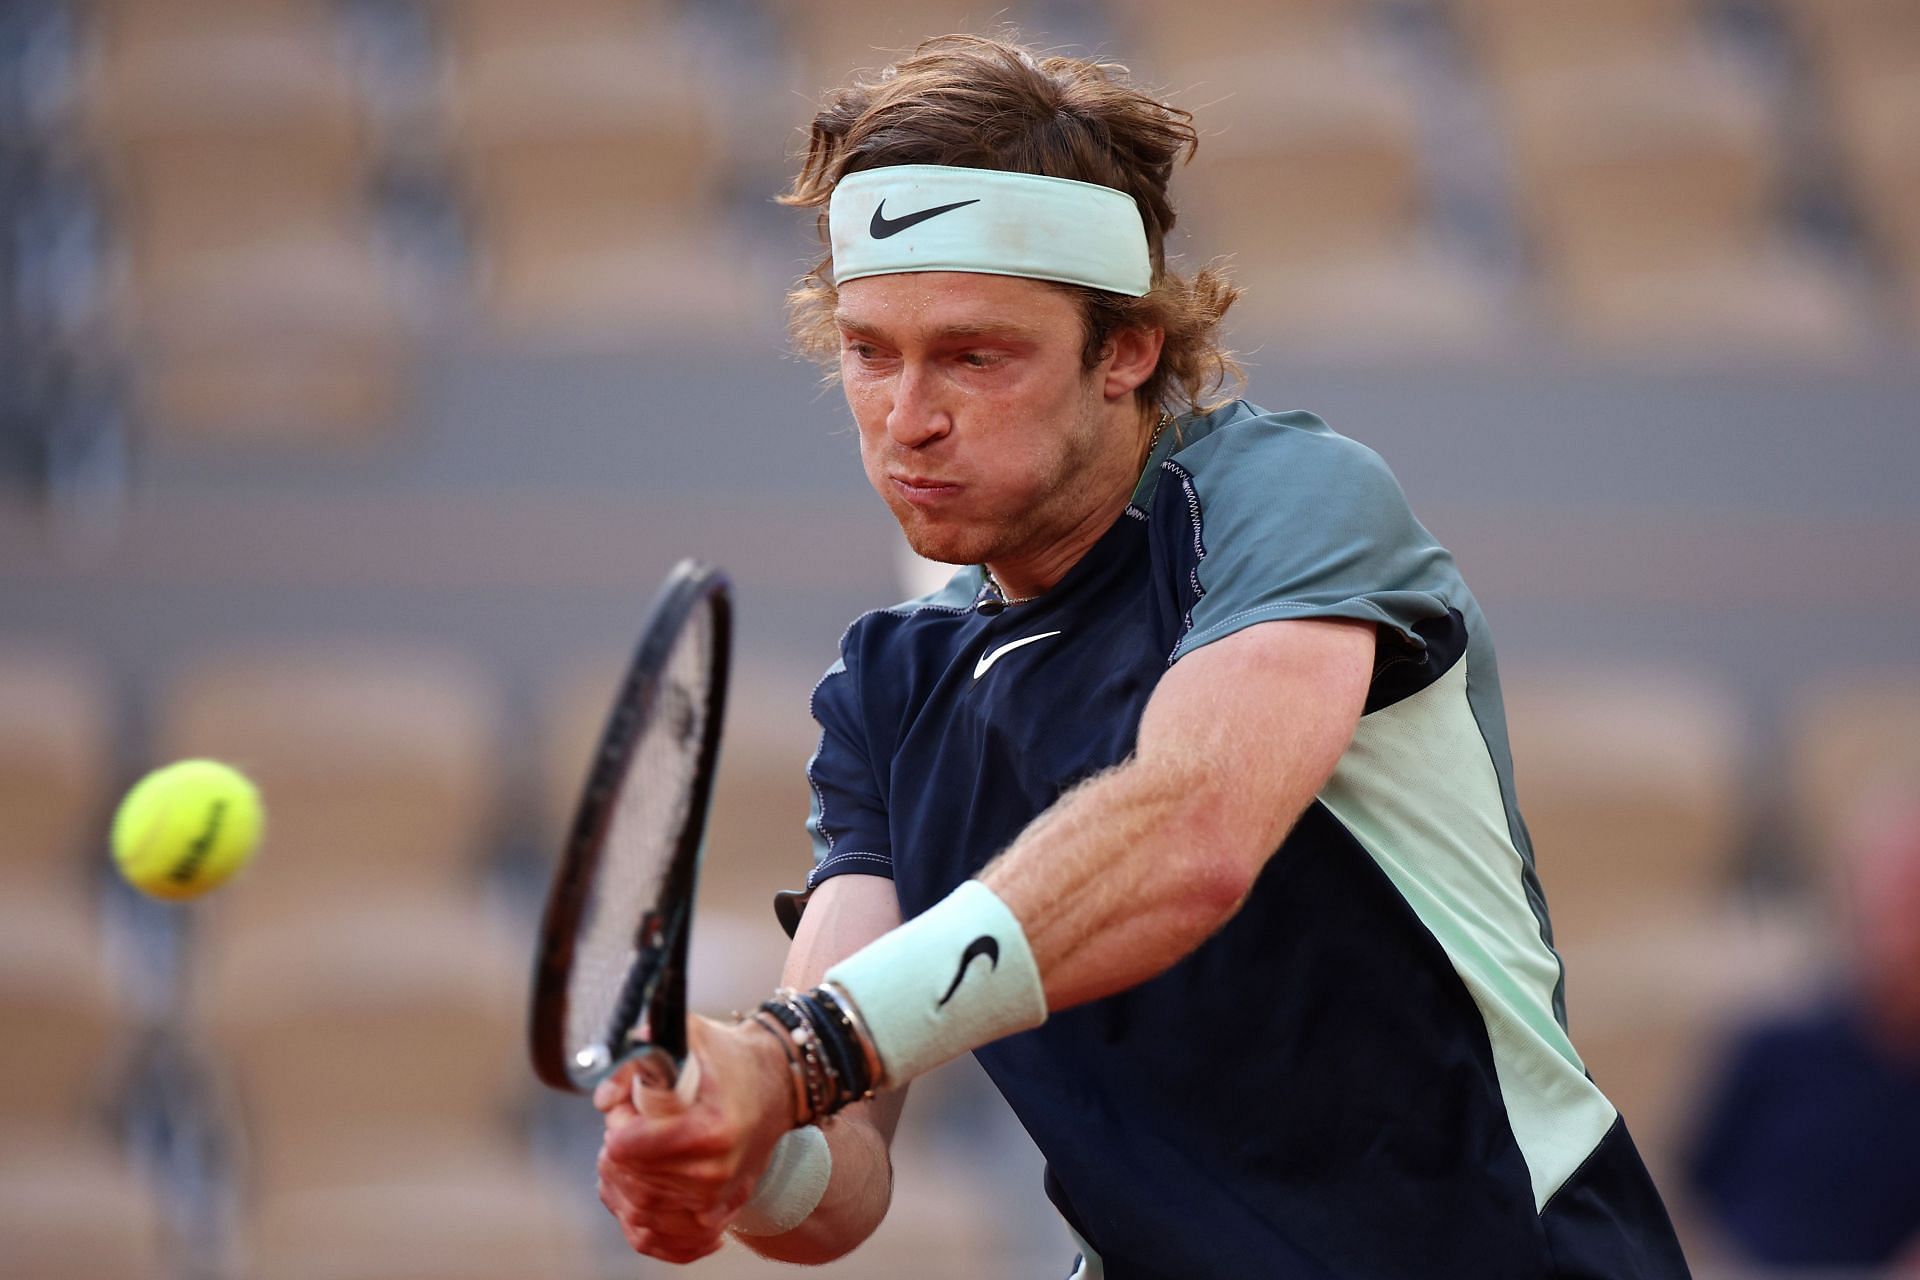 Andrey Rublev has earned $2 million for his 2022 exploits